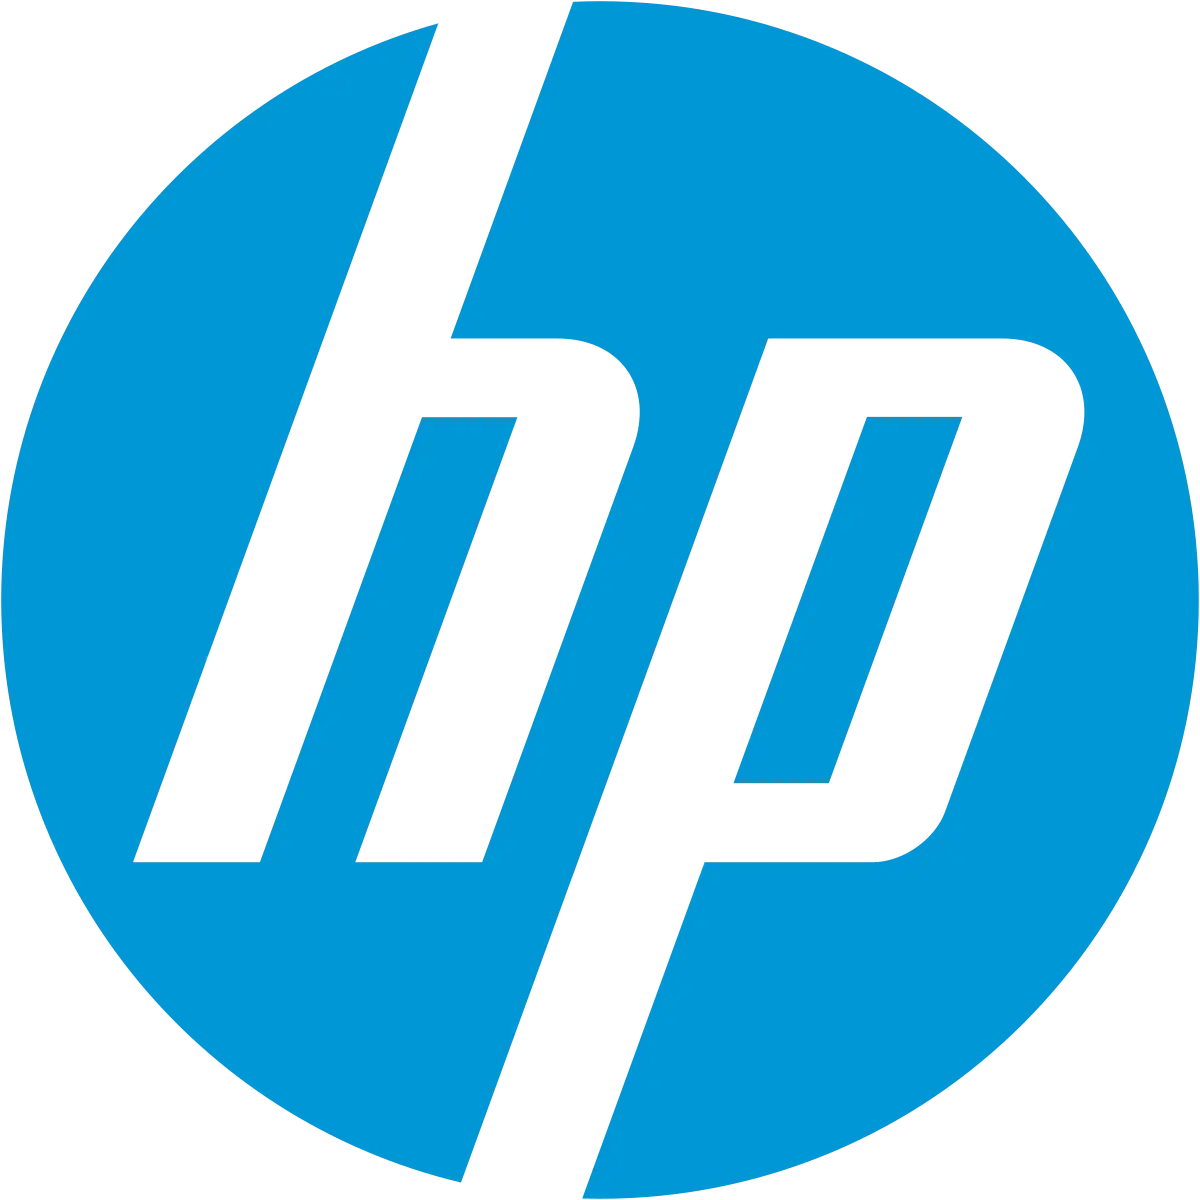 supply chain strategy & development manager at hewlett-packard company - What does a supply chain development manager do